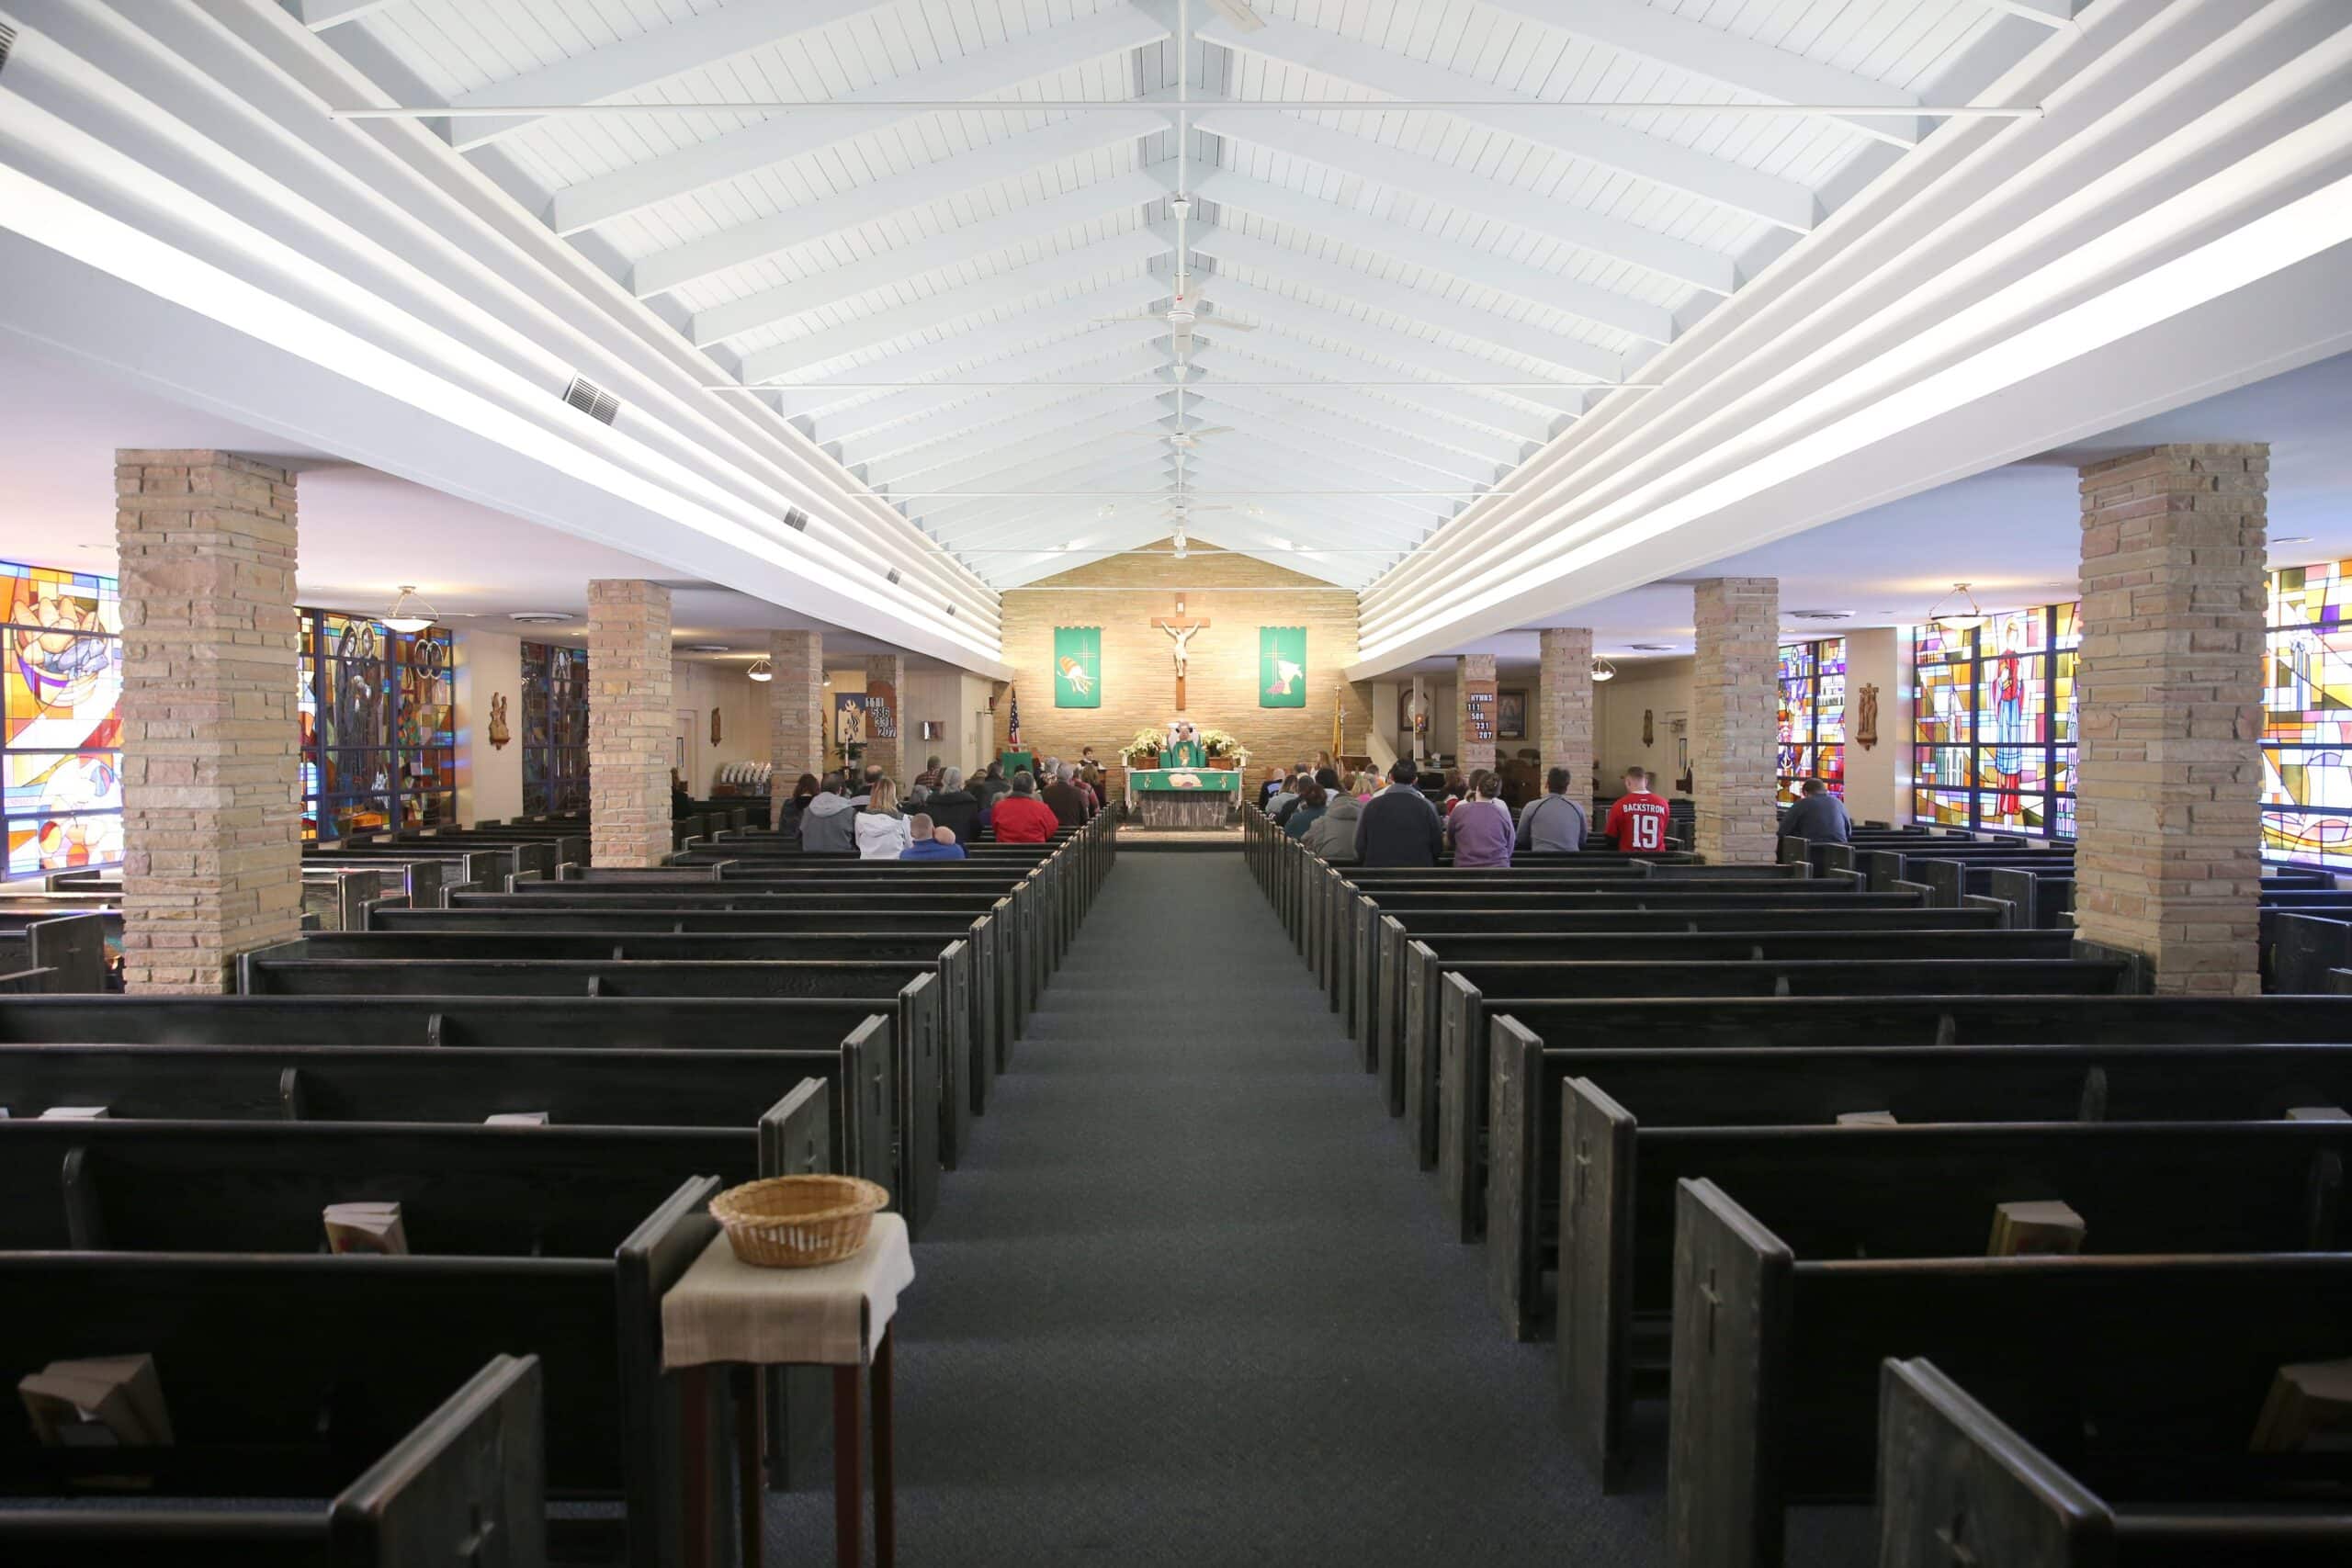 SPARSE CONGREGATION AT MARYLAND CHURCH